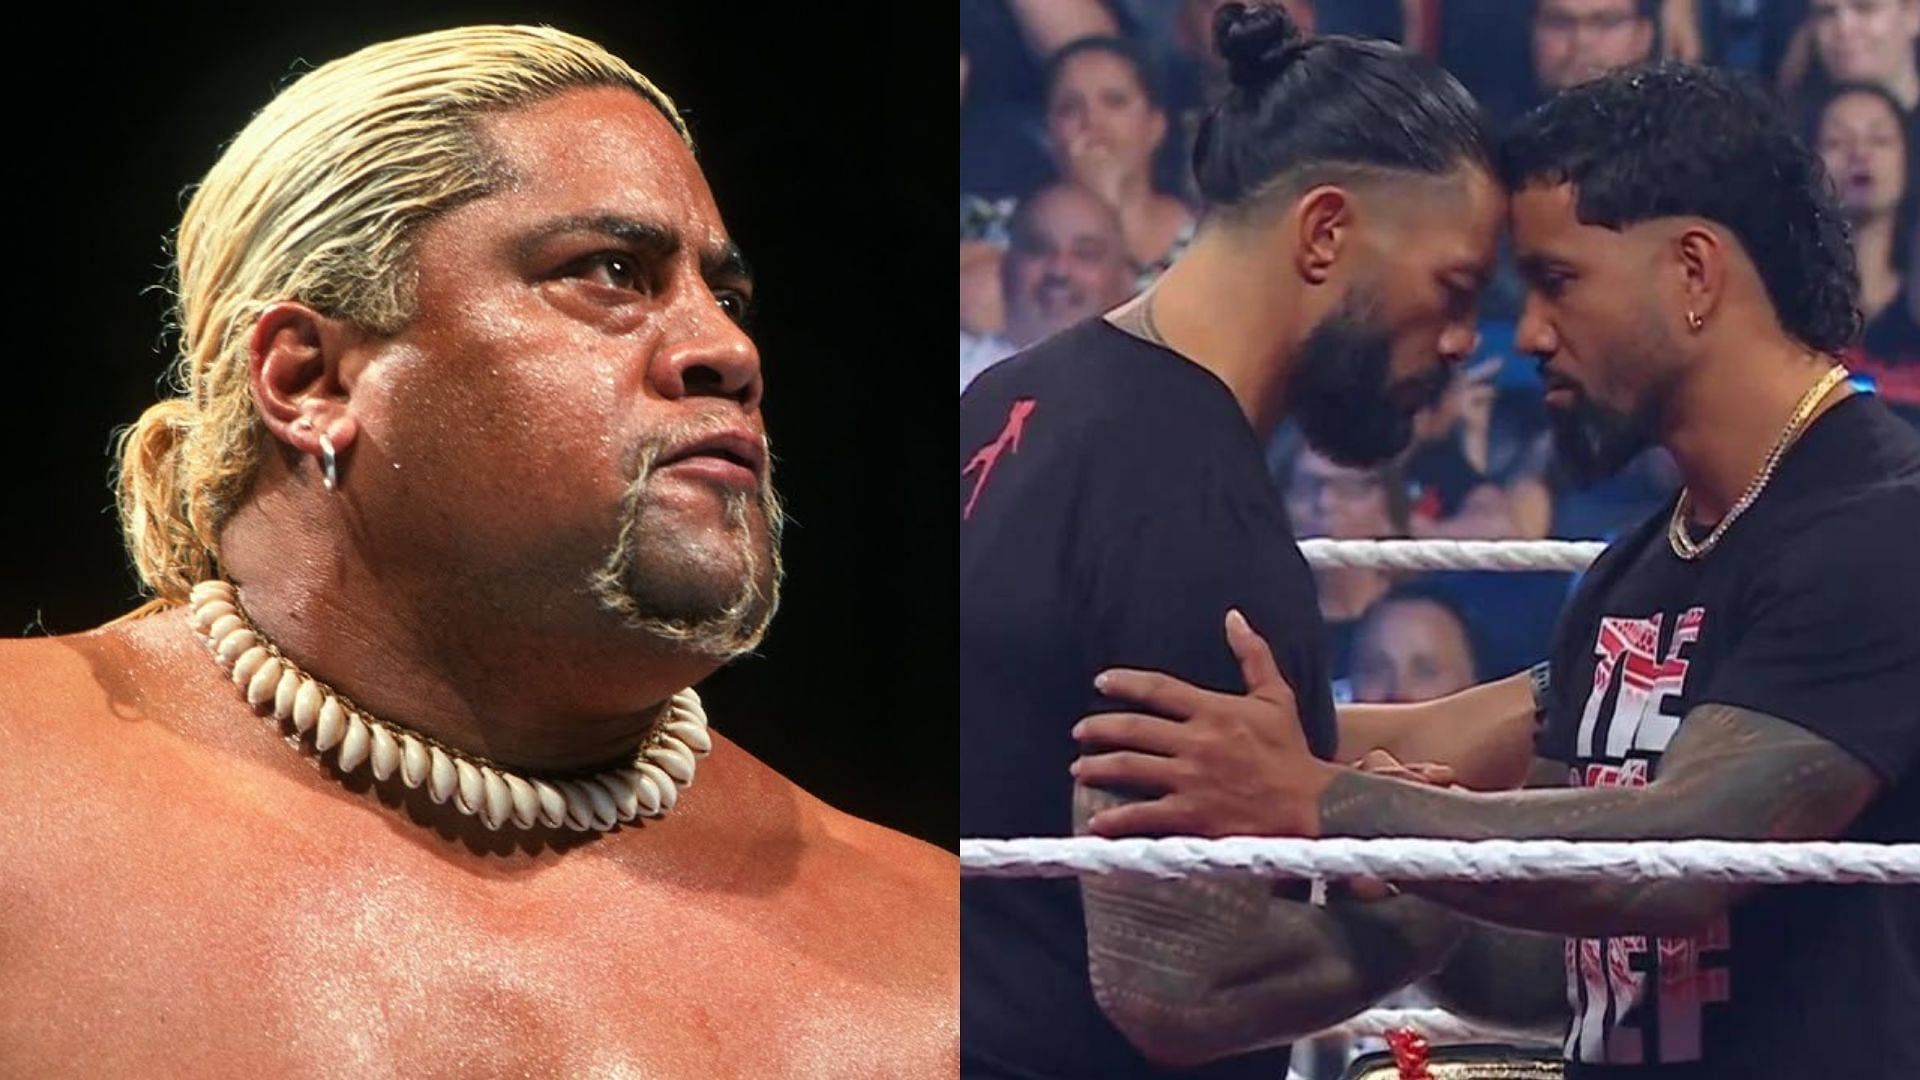 Rikishi has reacted to his son Jey Uso